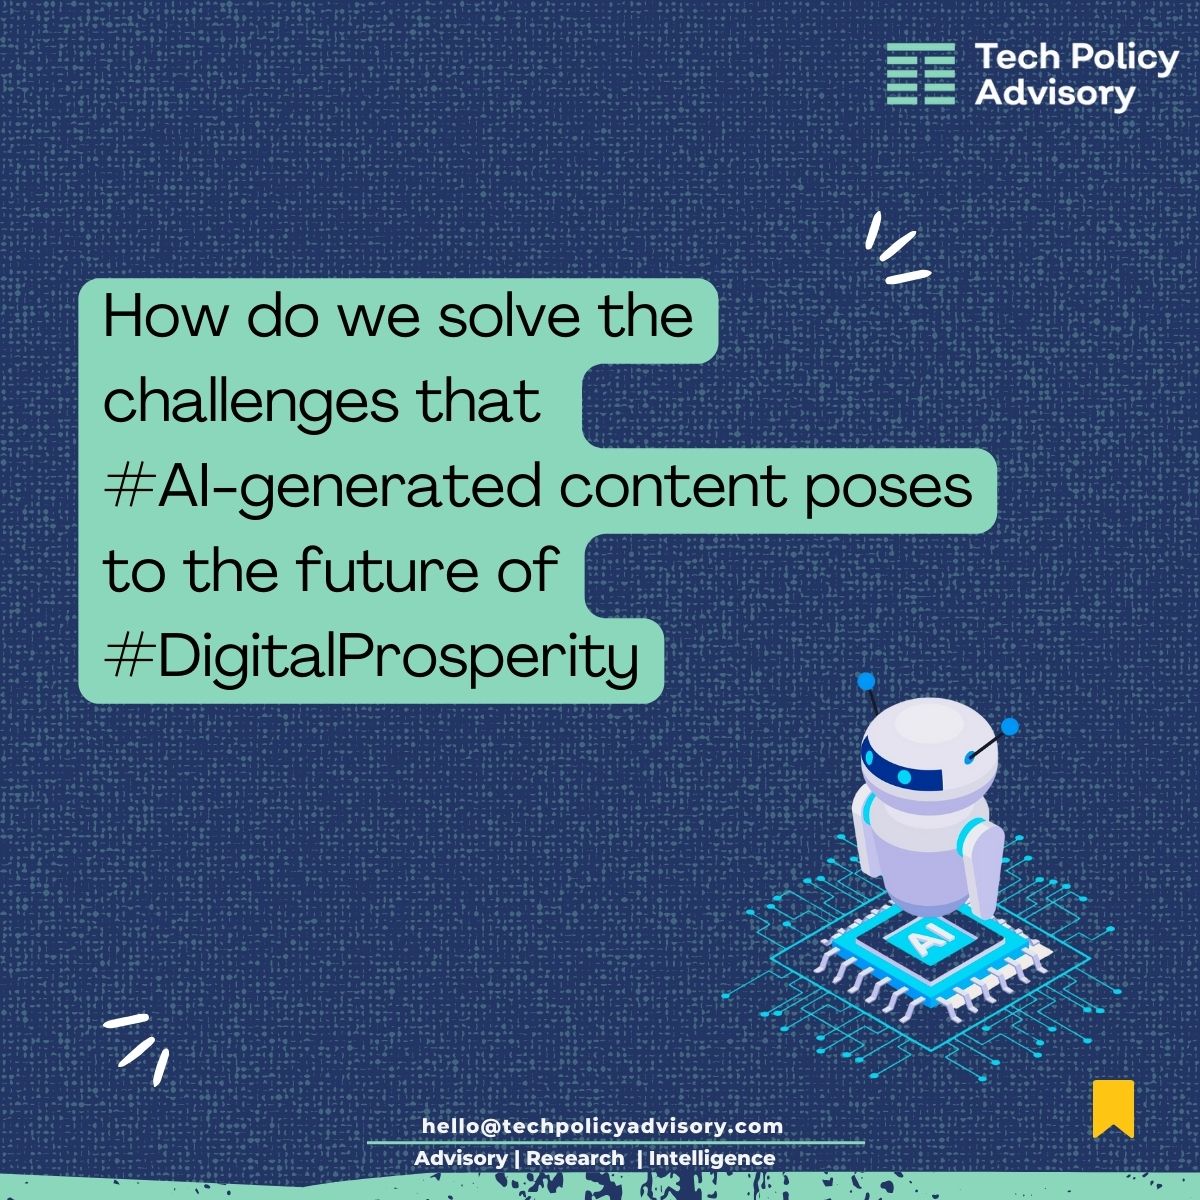 As we go deeper into the era of artificial intelligence, one pressing question emerges: How do we solve the challenges that #AI-generated content poses to the future of #DigitalProsperity?